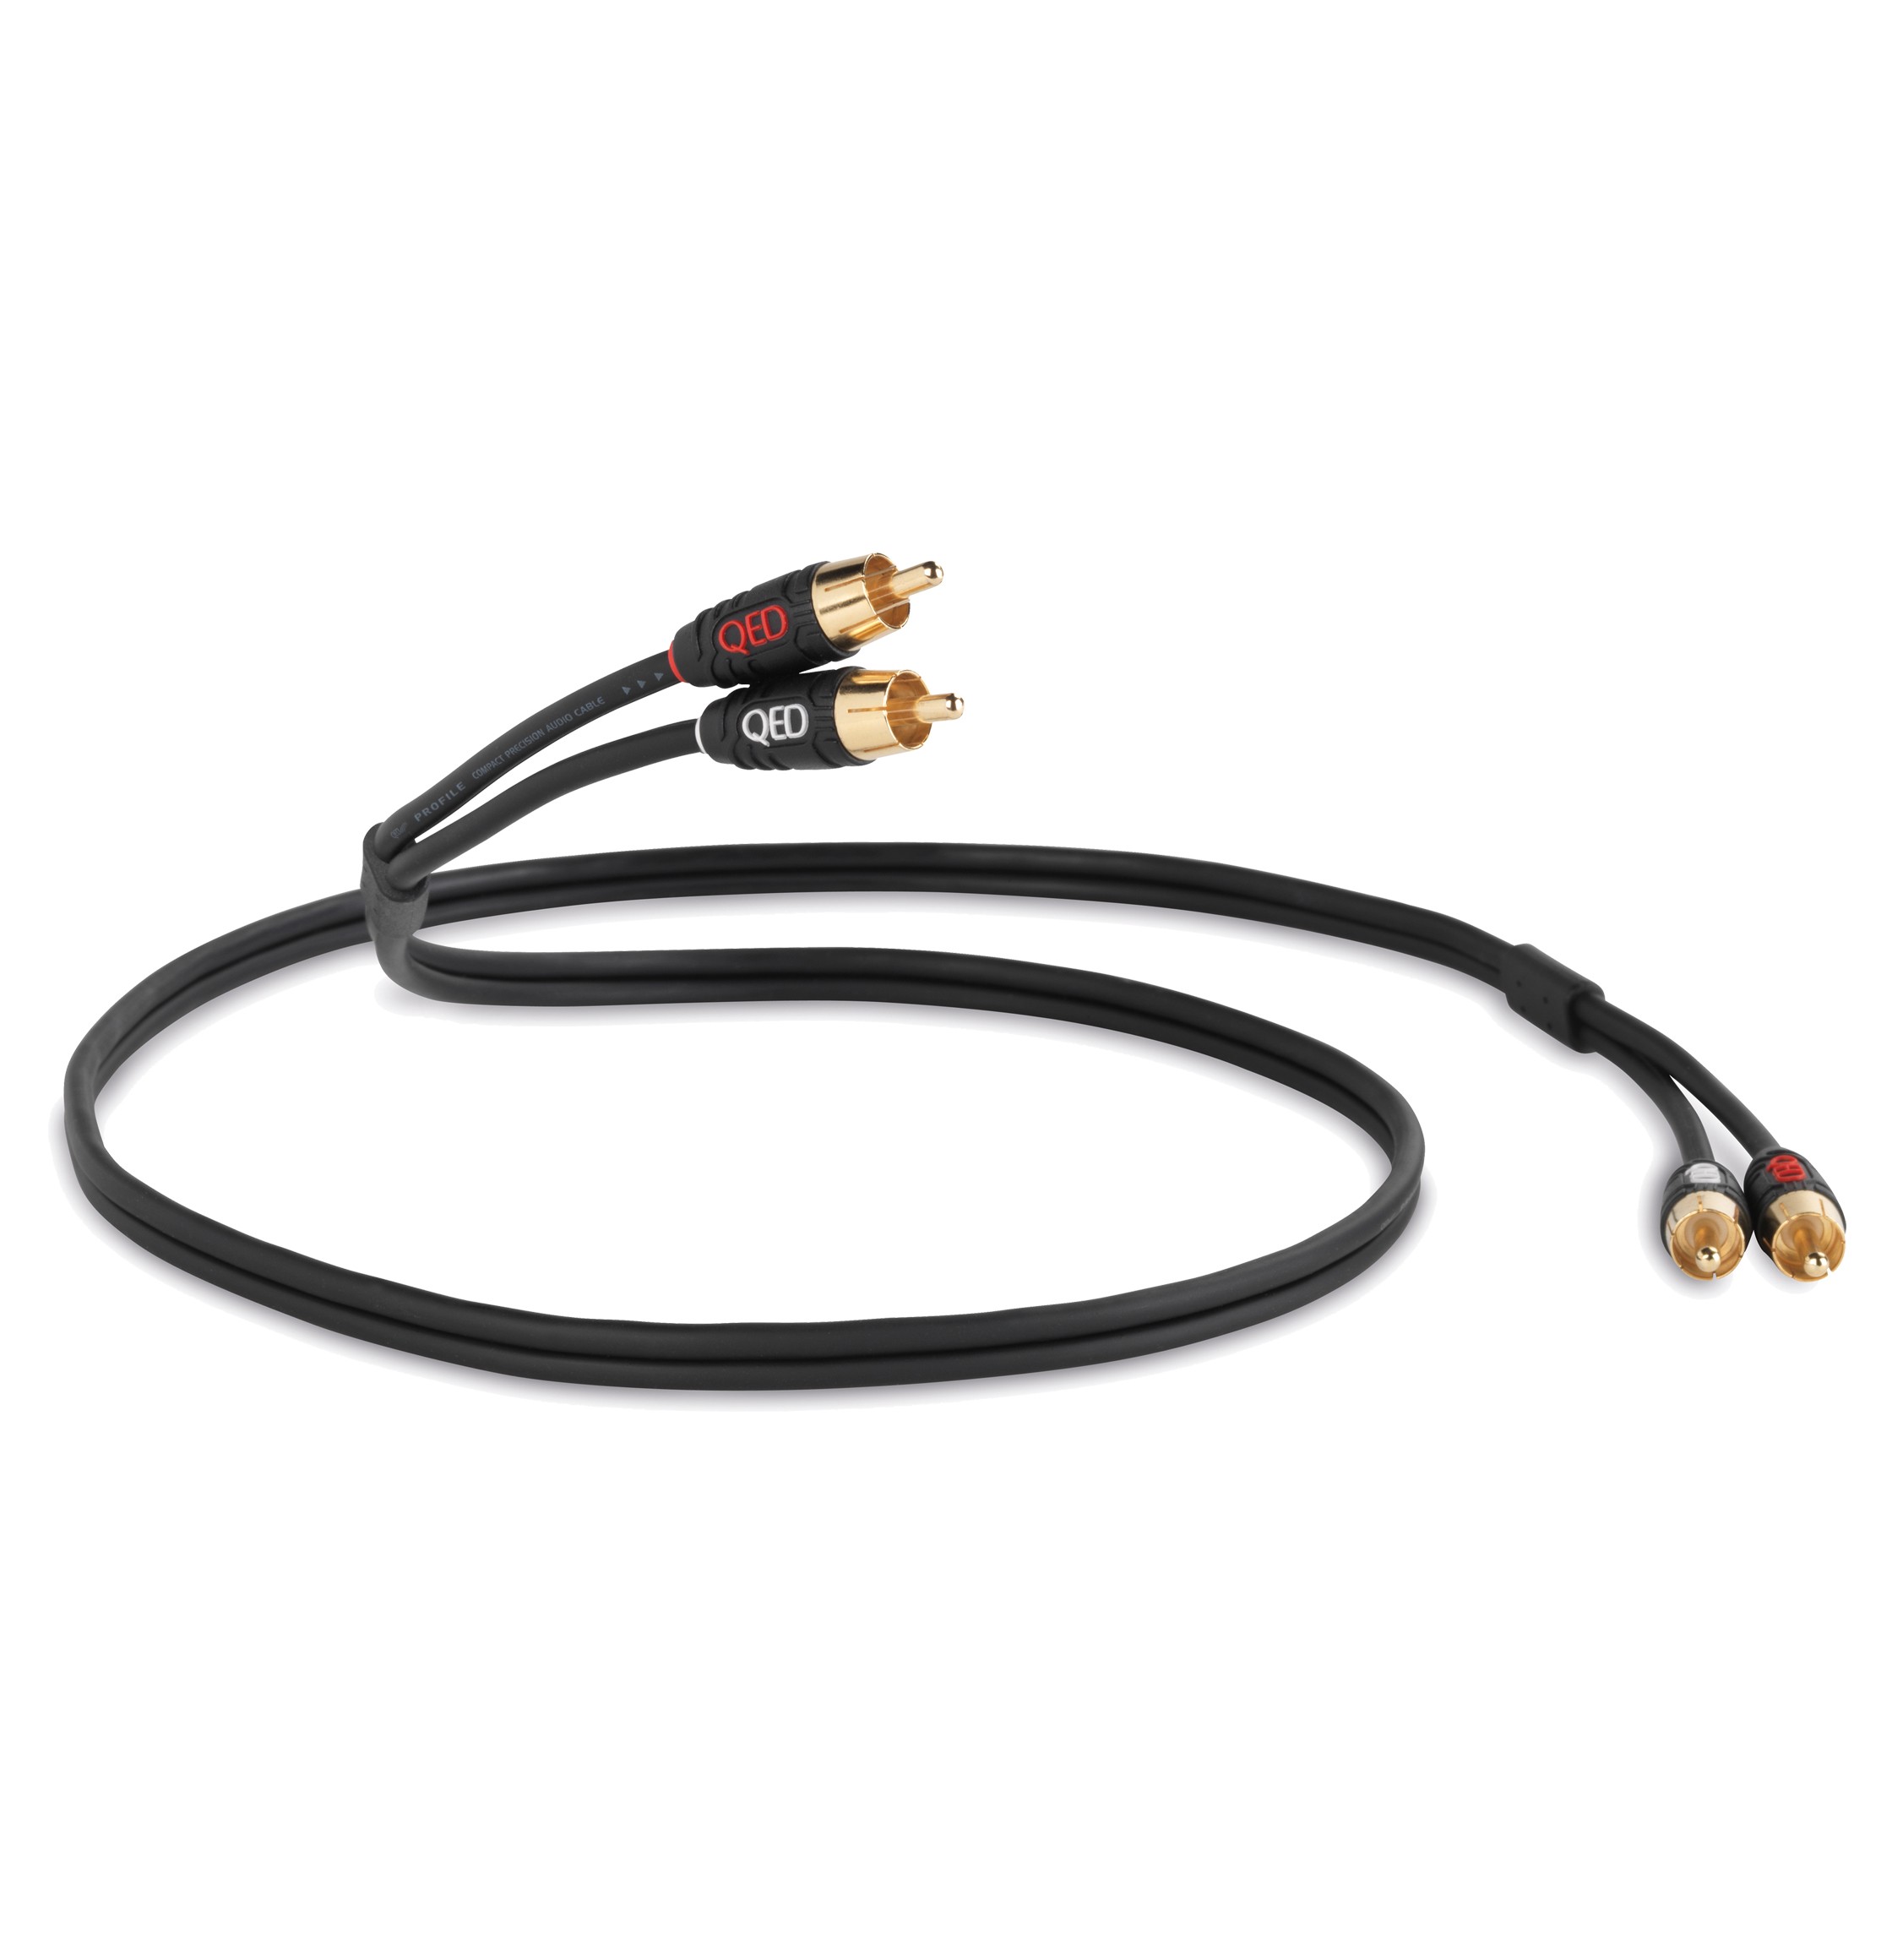 QED Profile RCA Stereo Interconnect Cable (5 Metres)